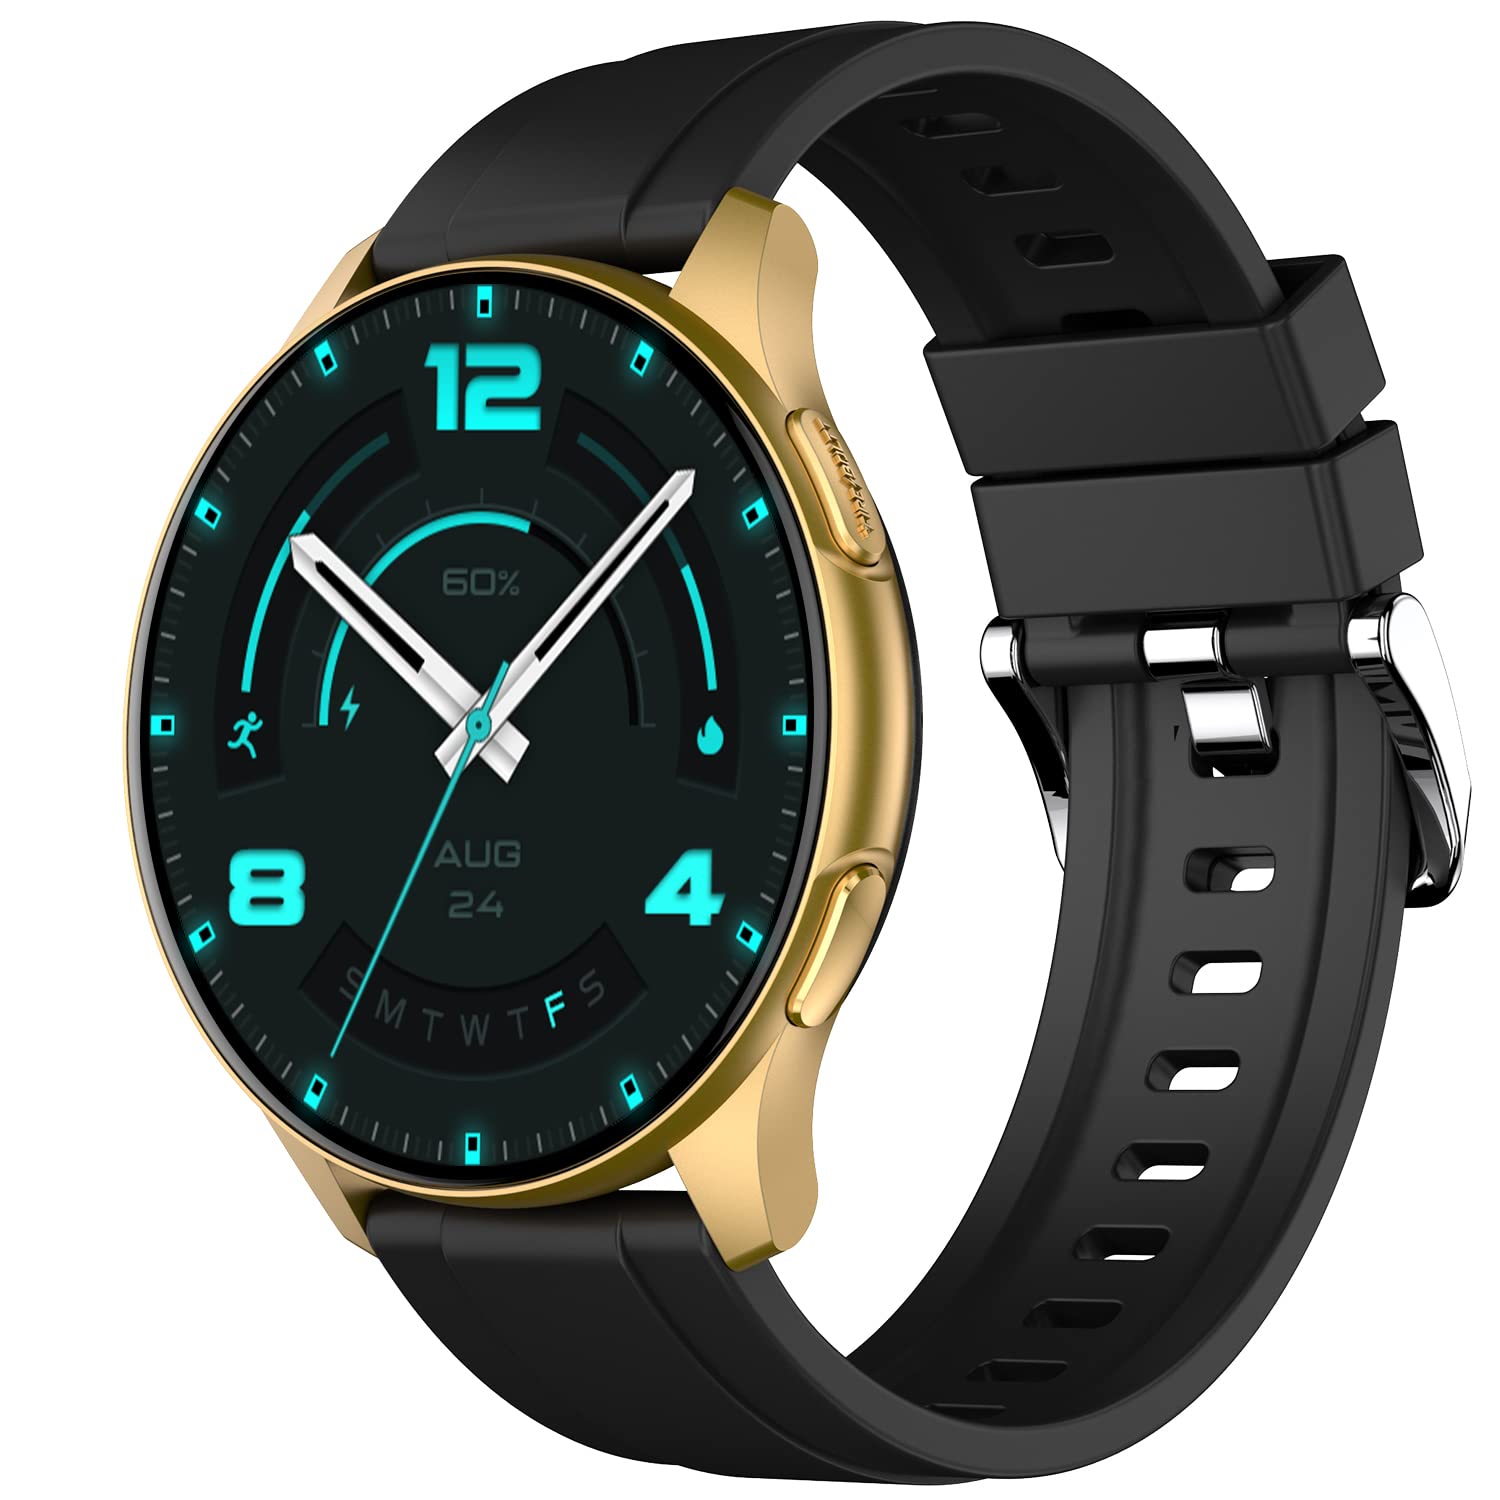 Fire-Boltt INVINCIBLE 1.39 inches AMOLED 454×454 Bluetooth Calling Smartwatch ALWAYS ON, 100 Sports Modes, 100 Inbuilt Watch Faces & 8GB (Gold Black S)